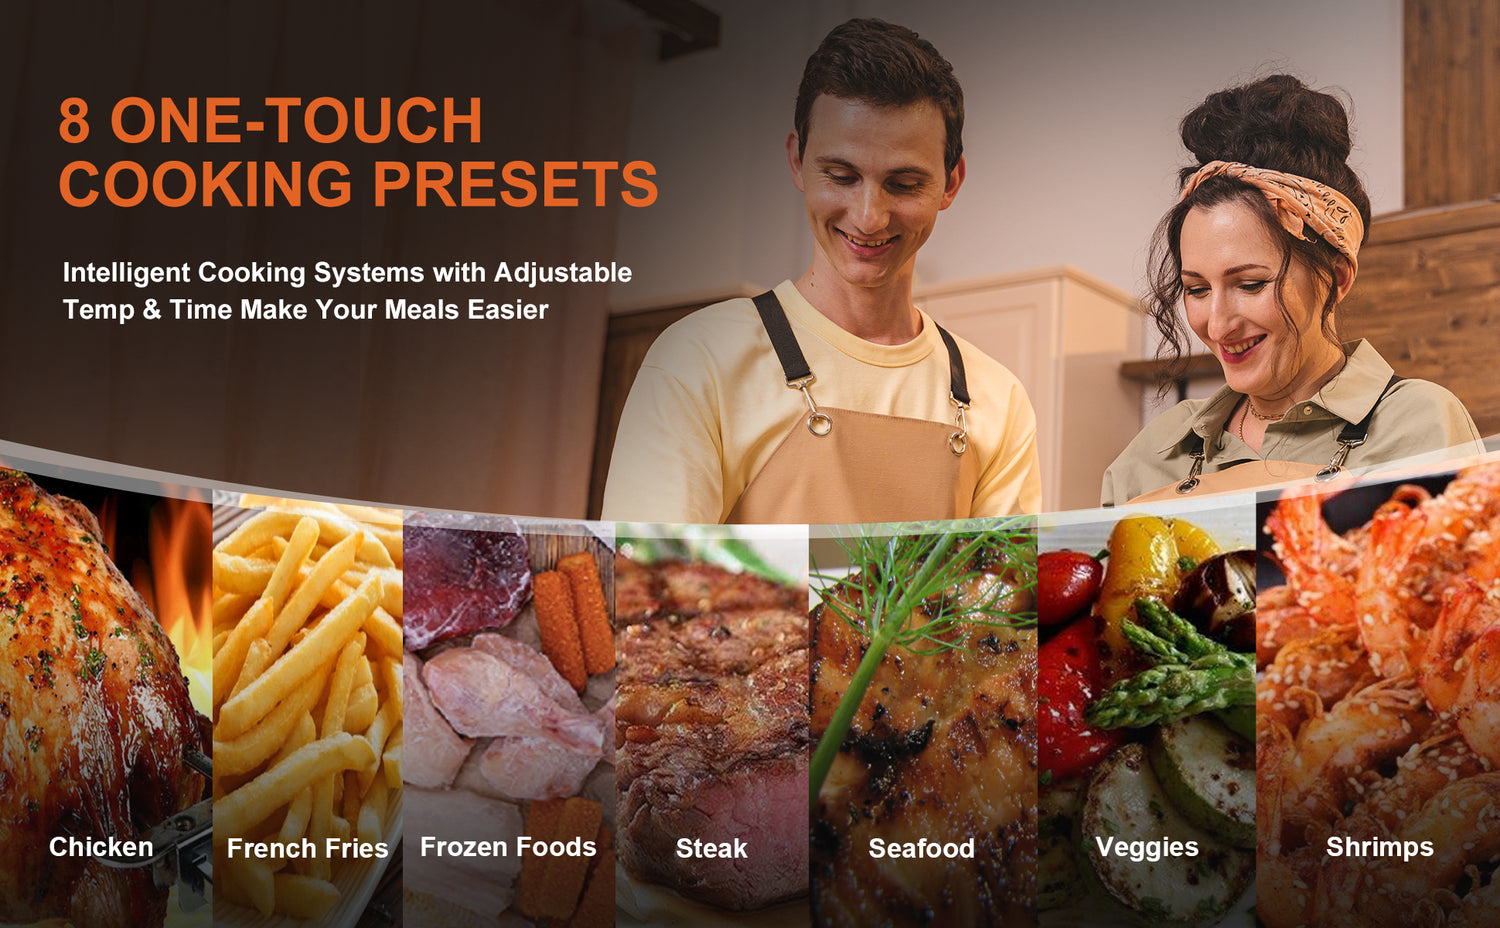 8 one-touch cooking presets Intelligent Cooking Systems with Adjustable Temp & Time Make Your Meals Easier